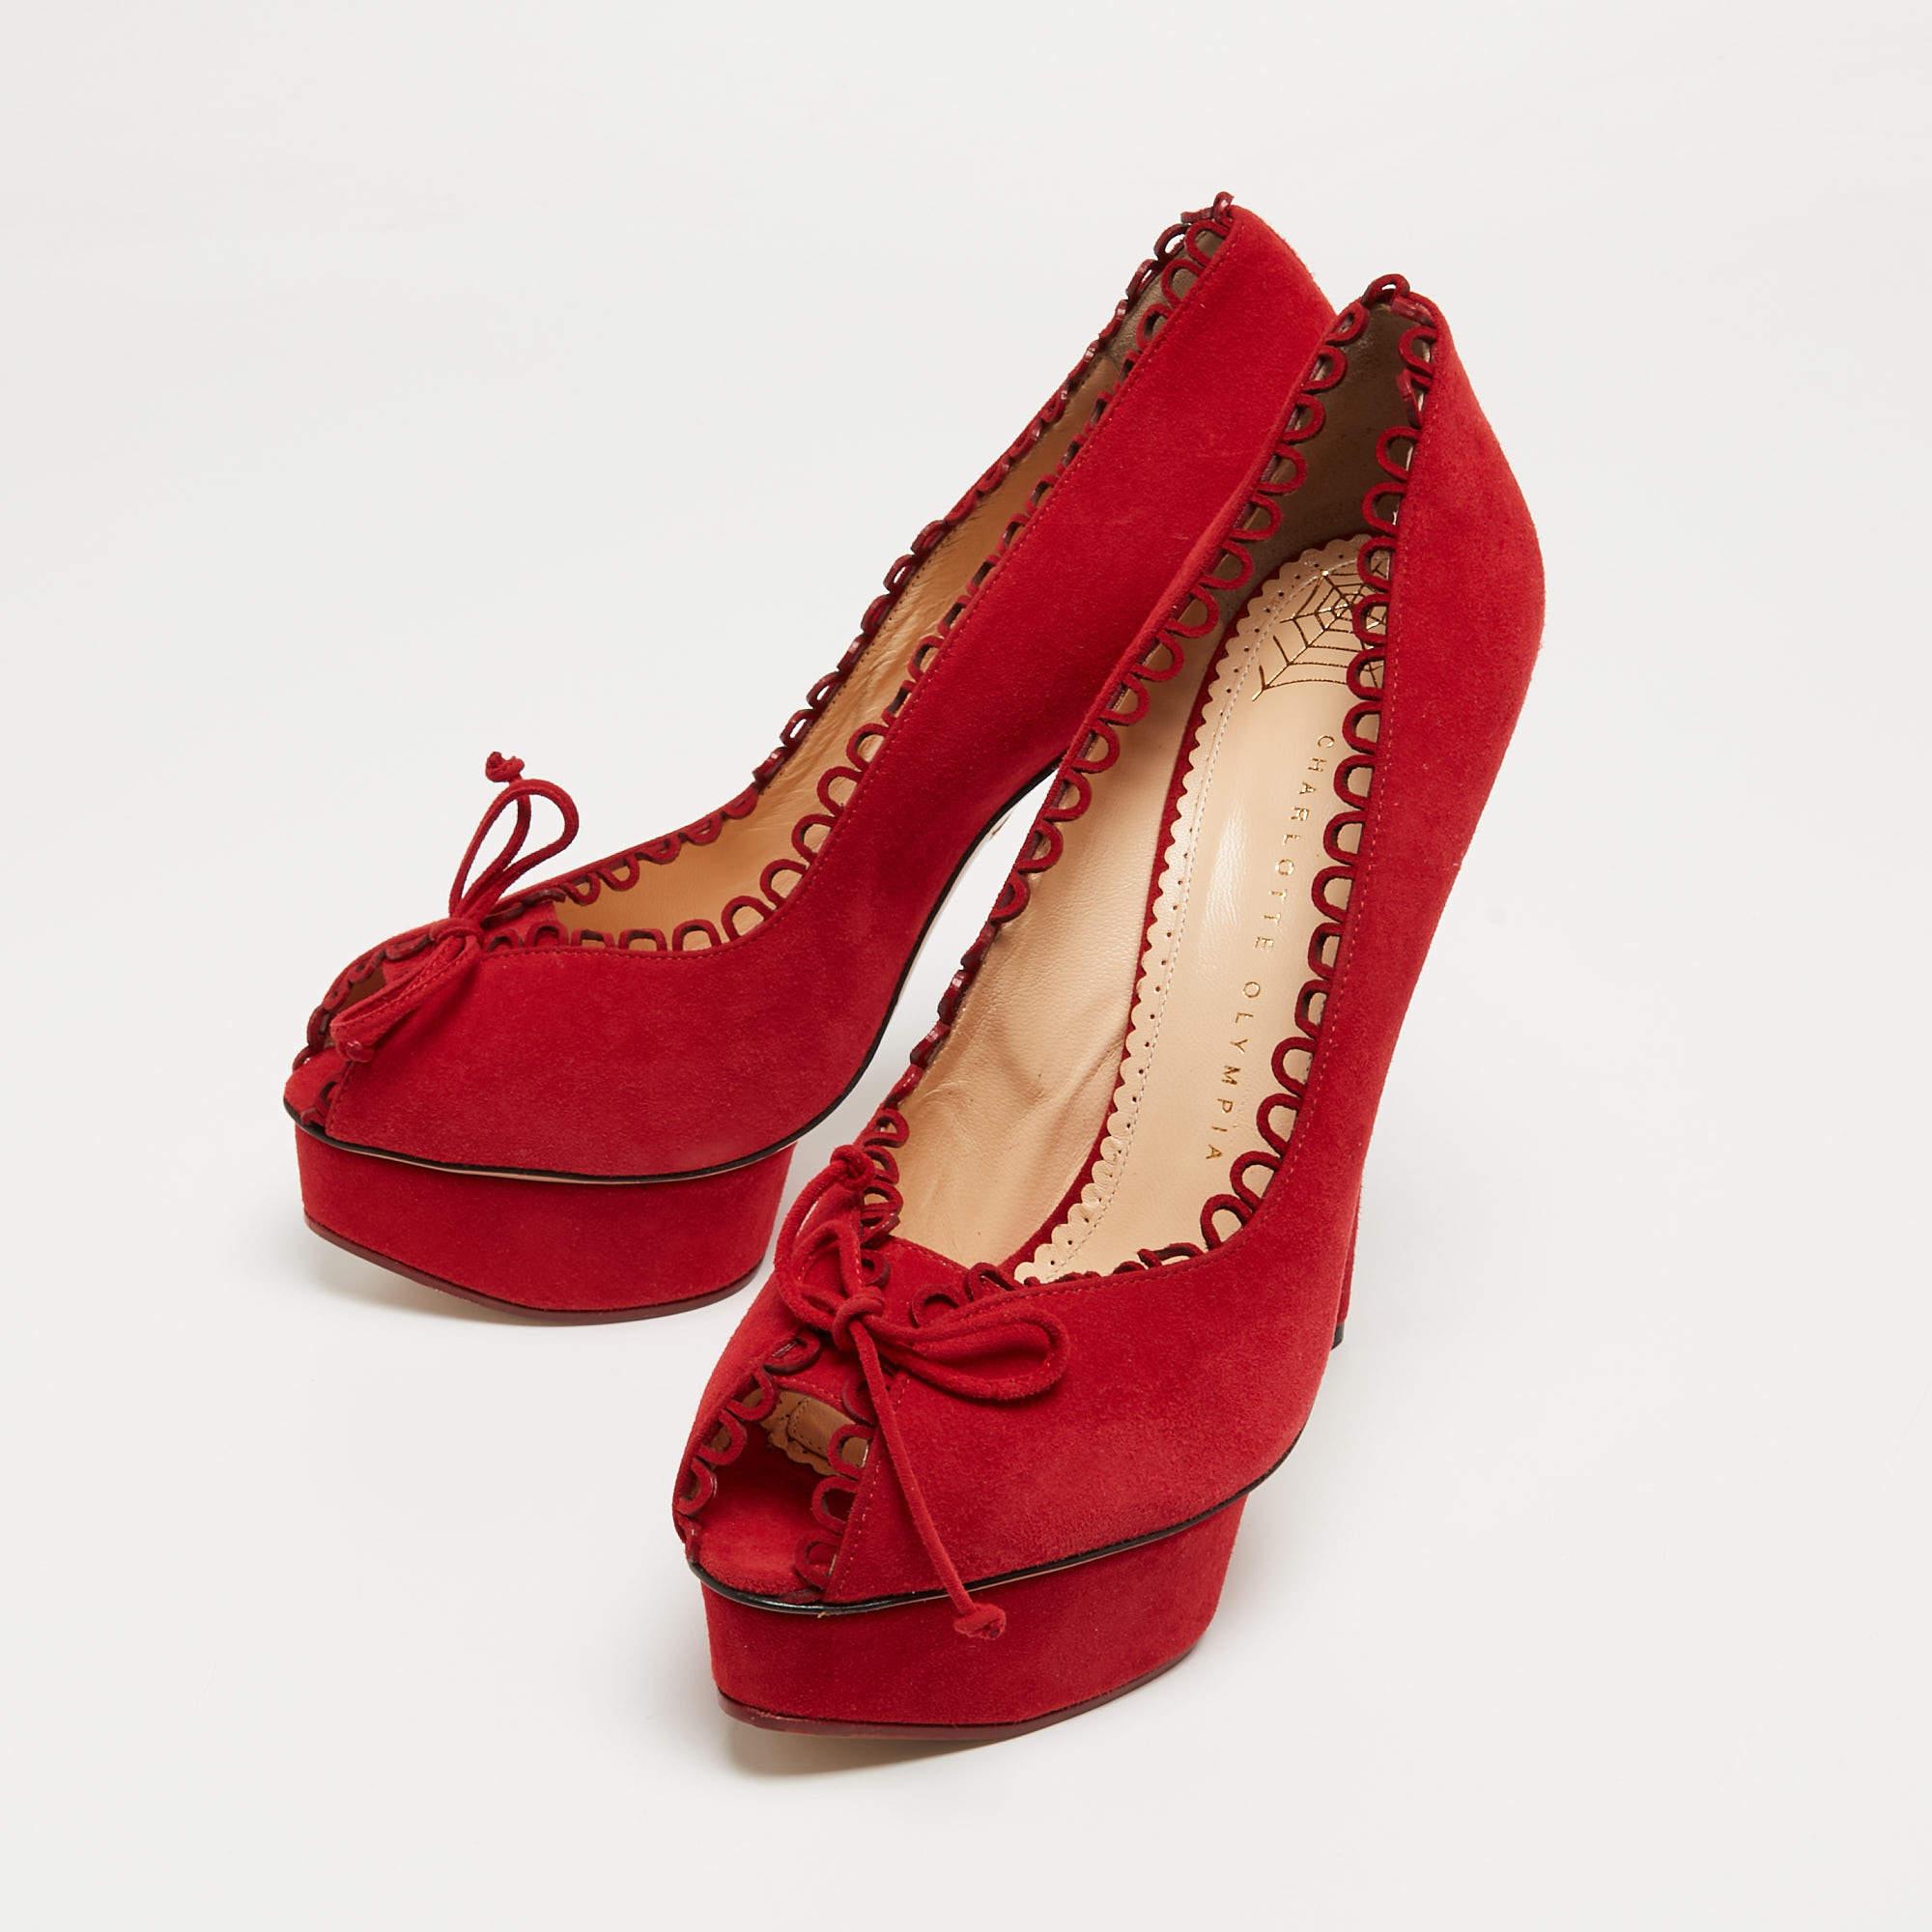 Charlotte Olympia Red Suede Daphne Scalloped Trim Peep ToePumps Size 40.5 For Sale 3